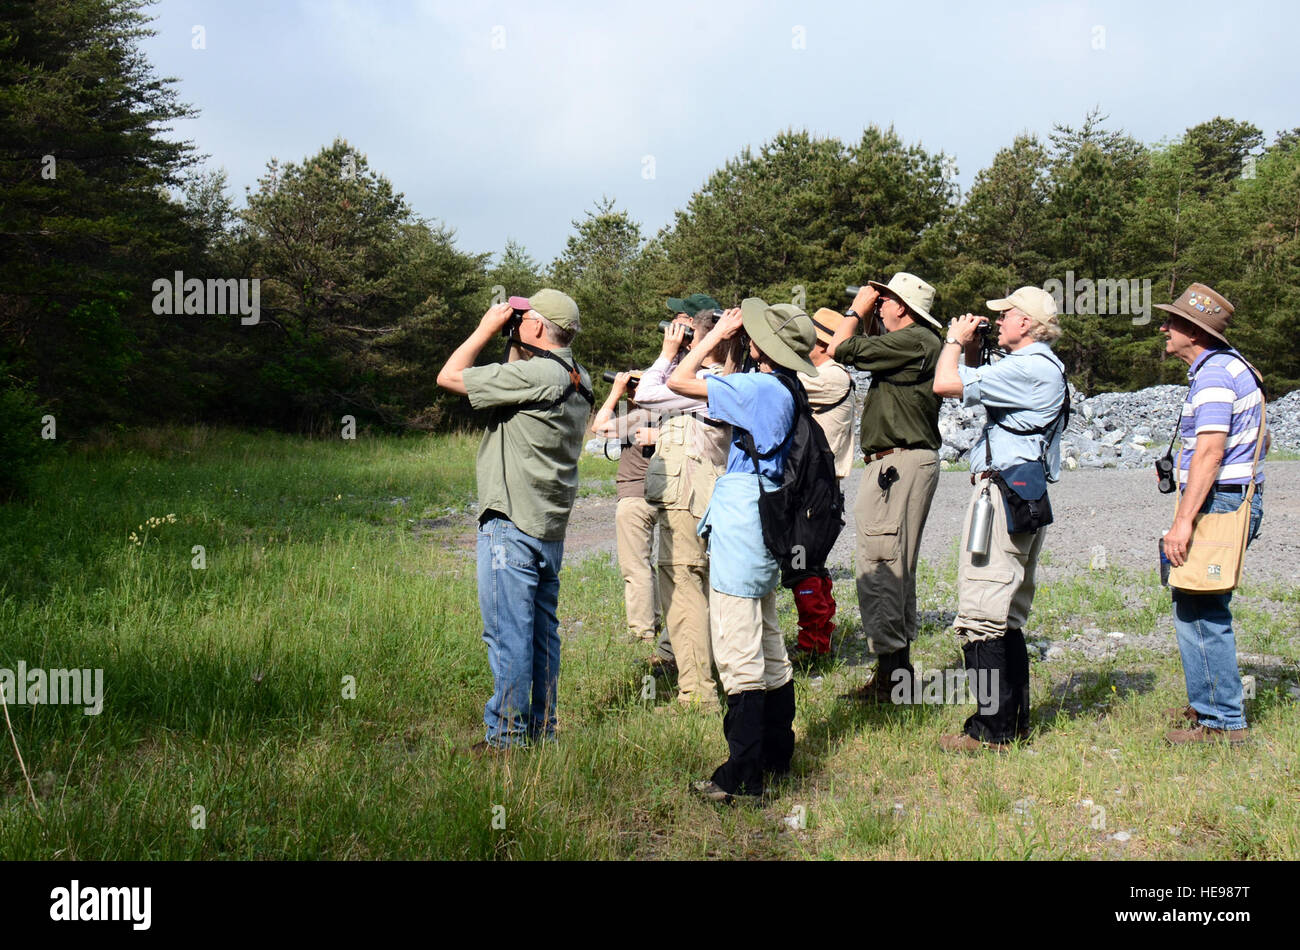 Birders take part in a bird walk led by the installation's wildlife staff, May 27, 2015. Fort Indiantown Gap currently provides habitat for 40 species of mammals, 249 species of birds, 36 species of reptiles and amphibians, 27 species of fish and many notable species of invertebrates including 83 species of butterflies and 241 species of moths. This includes excellent populations of deer, turkey, bear, bobcat, rabbit, squirrel, wild trout, amphibians, reptiles, small mammals and songbirds. The installation covers more than 17,000 acres, including approximately 1,000 acres of scrub oak and pitc Stock Photo